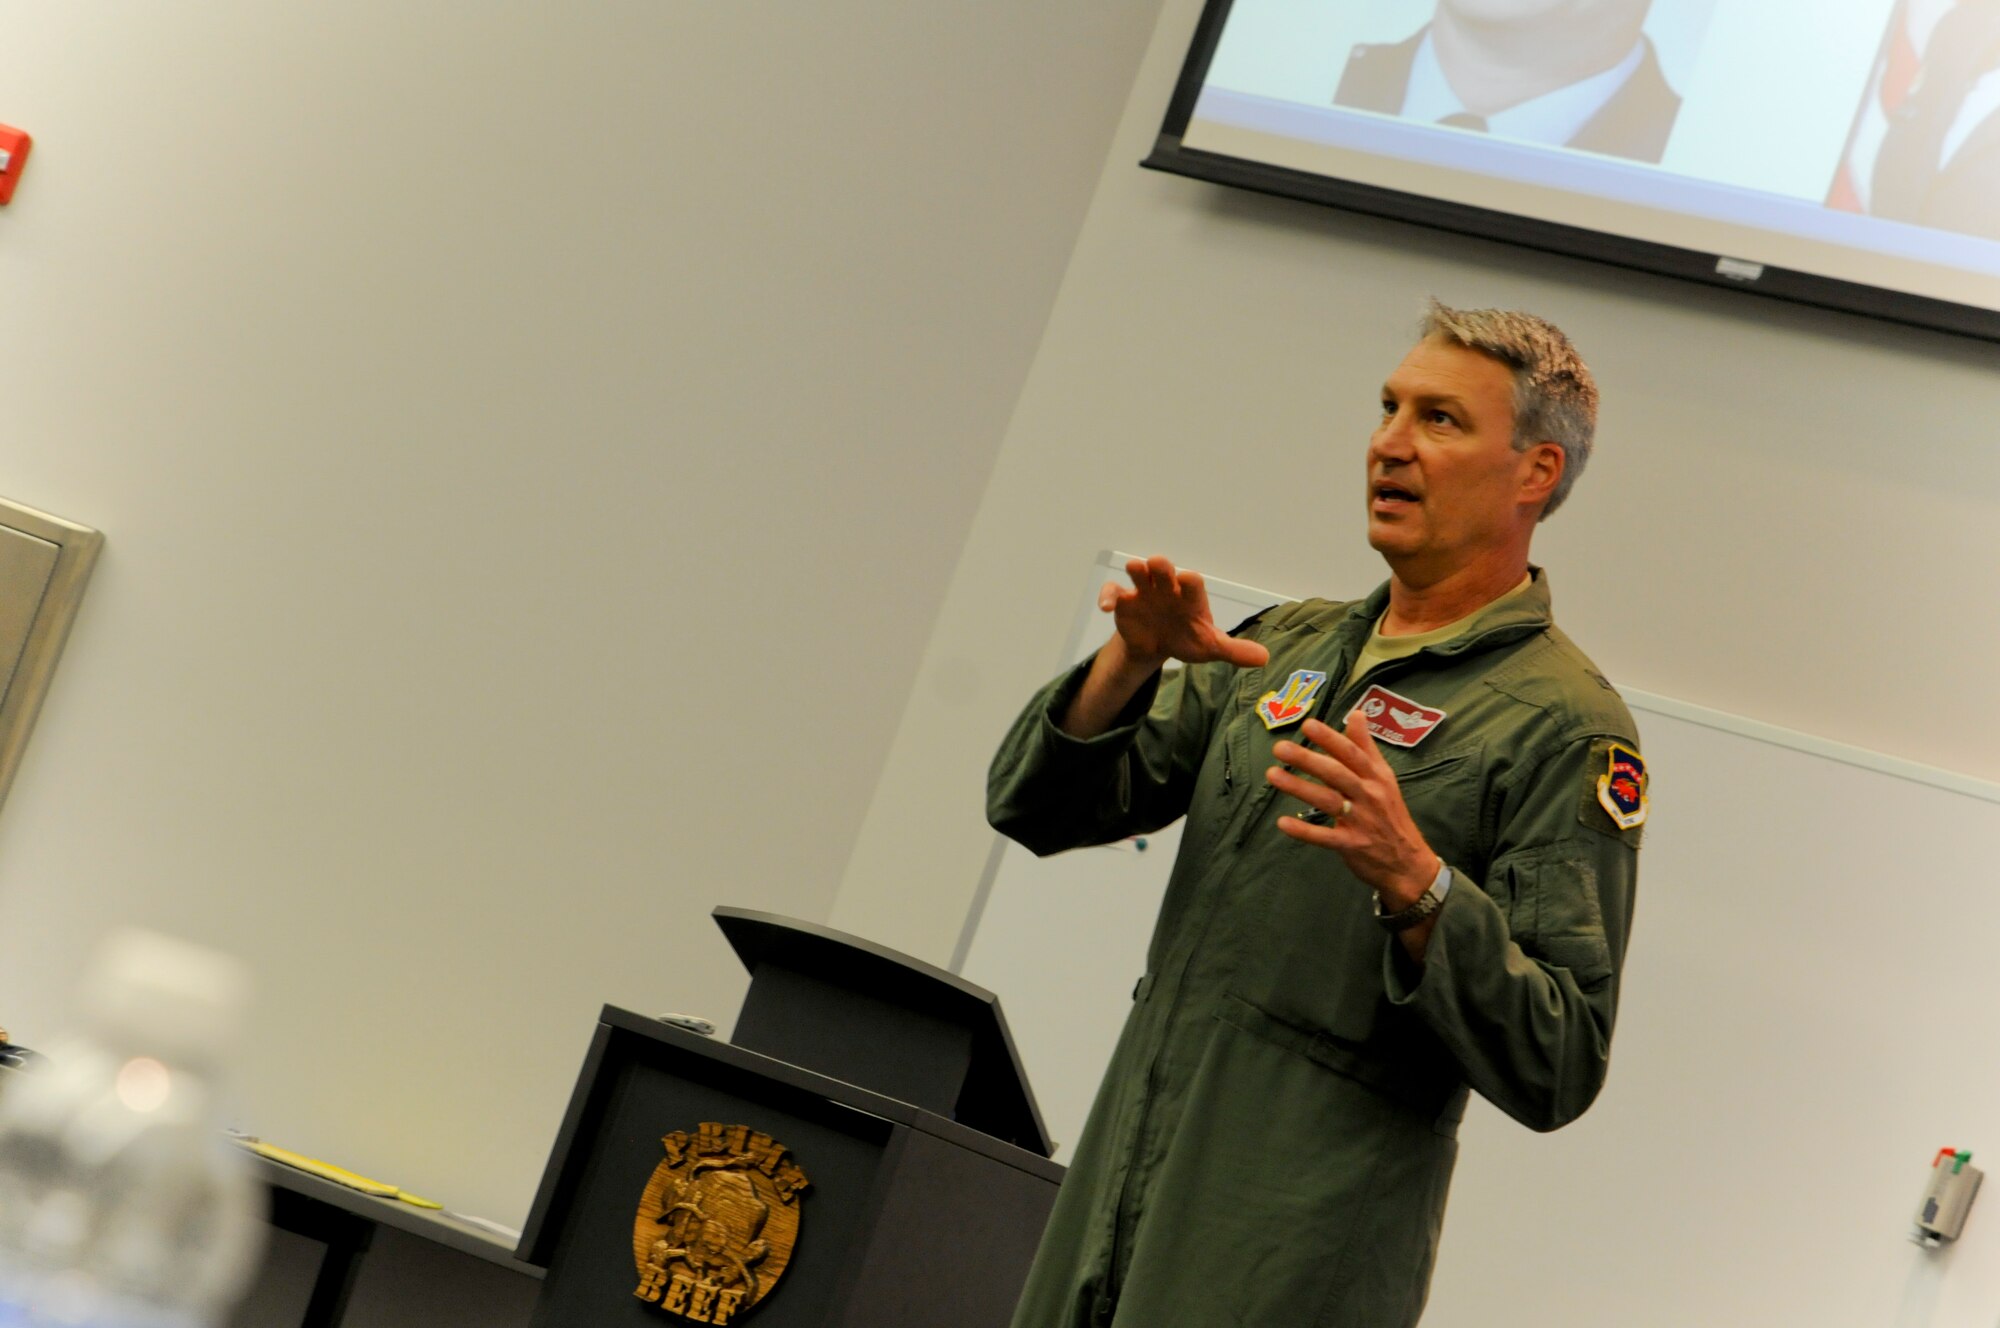 Brig. Gen. Kurt Vogel, commander of the Arkansas Air National Guard, speaks to Airmen during a newcomers orientation class held Aug. 1, 2015 at Ebbing Air National Guard Base, Ark. Vogel relayed the priorities of The Adjutant General, Maj. Gen. Mark Berry, and took time to interact with Airmen to learn about their jobs and impact on the new mission. (U.S. Air National Guard photo by Capt. Holli Nelson/Released)